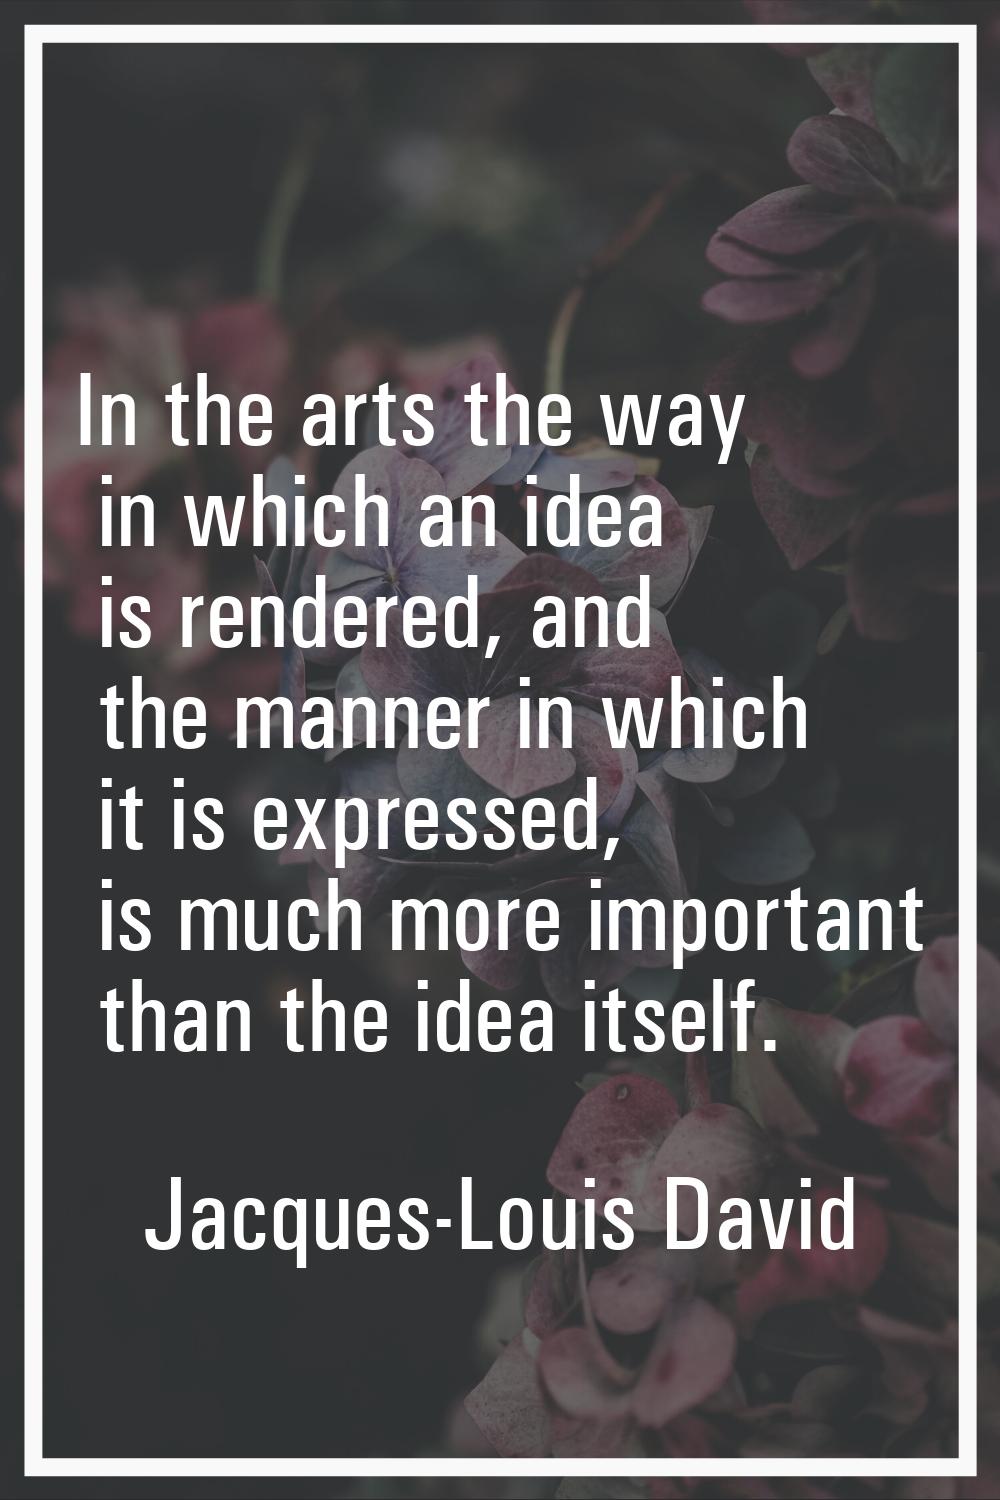 In the arts the way in which an idea is rendered, and the manner in which it is expressed, is much 